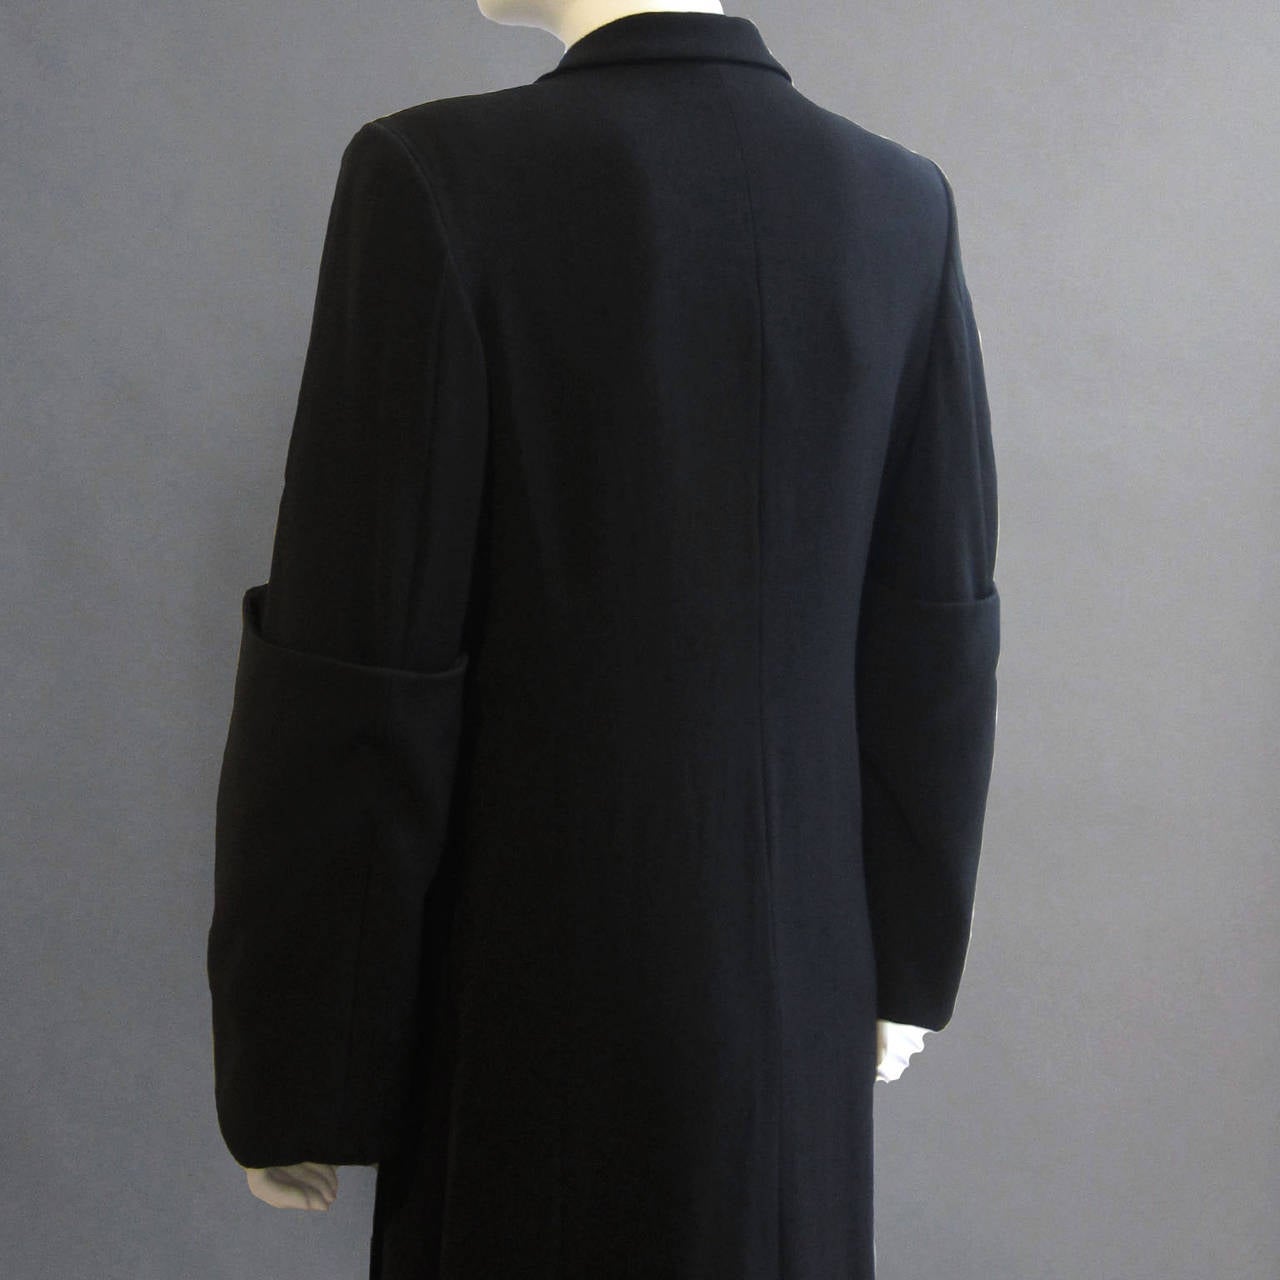 Women's 1992 COMME DES GARCONS Black Floor Length Coat with Exaggerated Cuff Detail